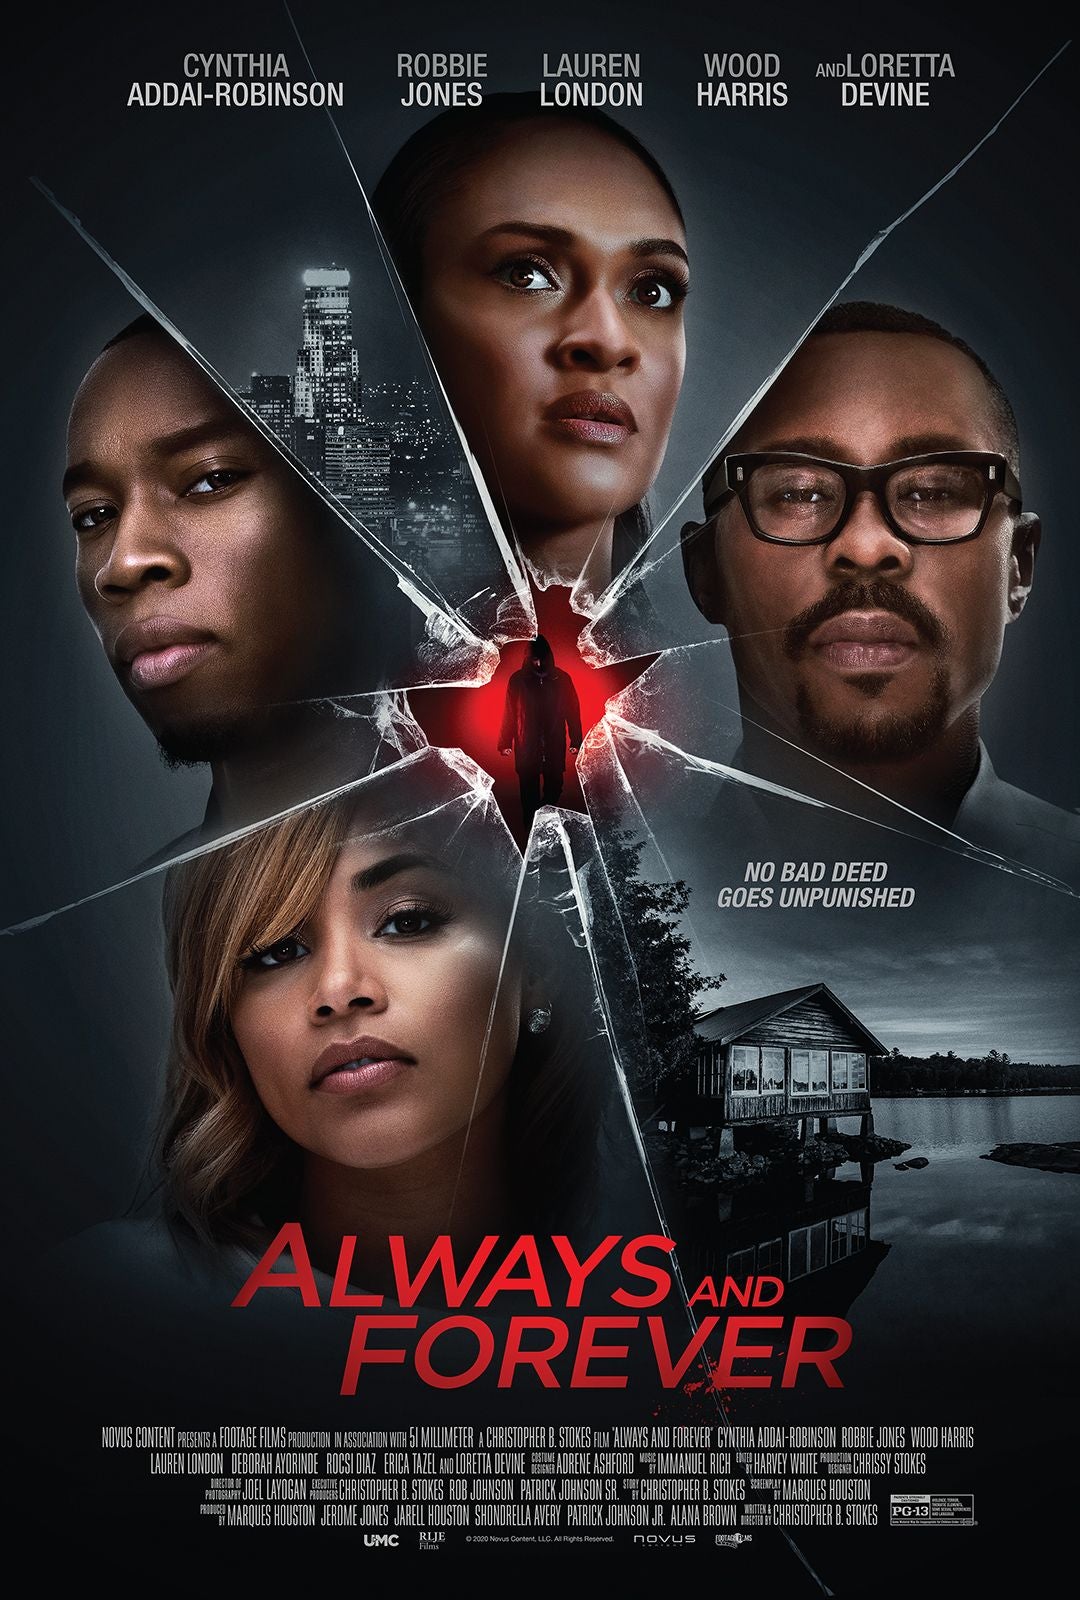 Lauren London Returns To The Big Screen In Thriller ‘Always And Forever’